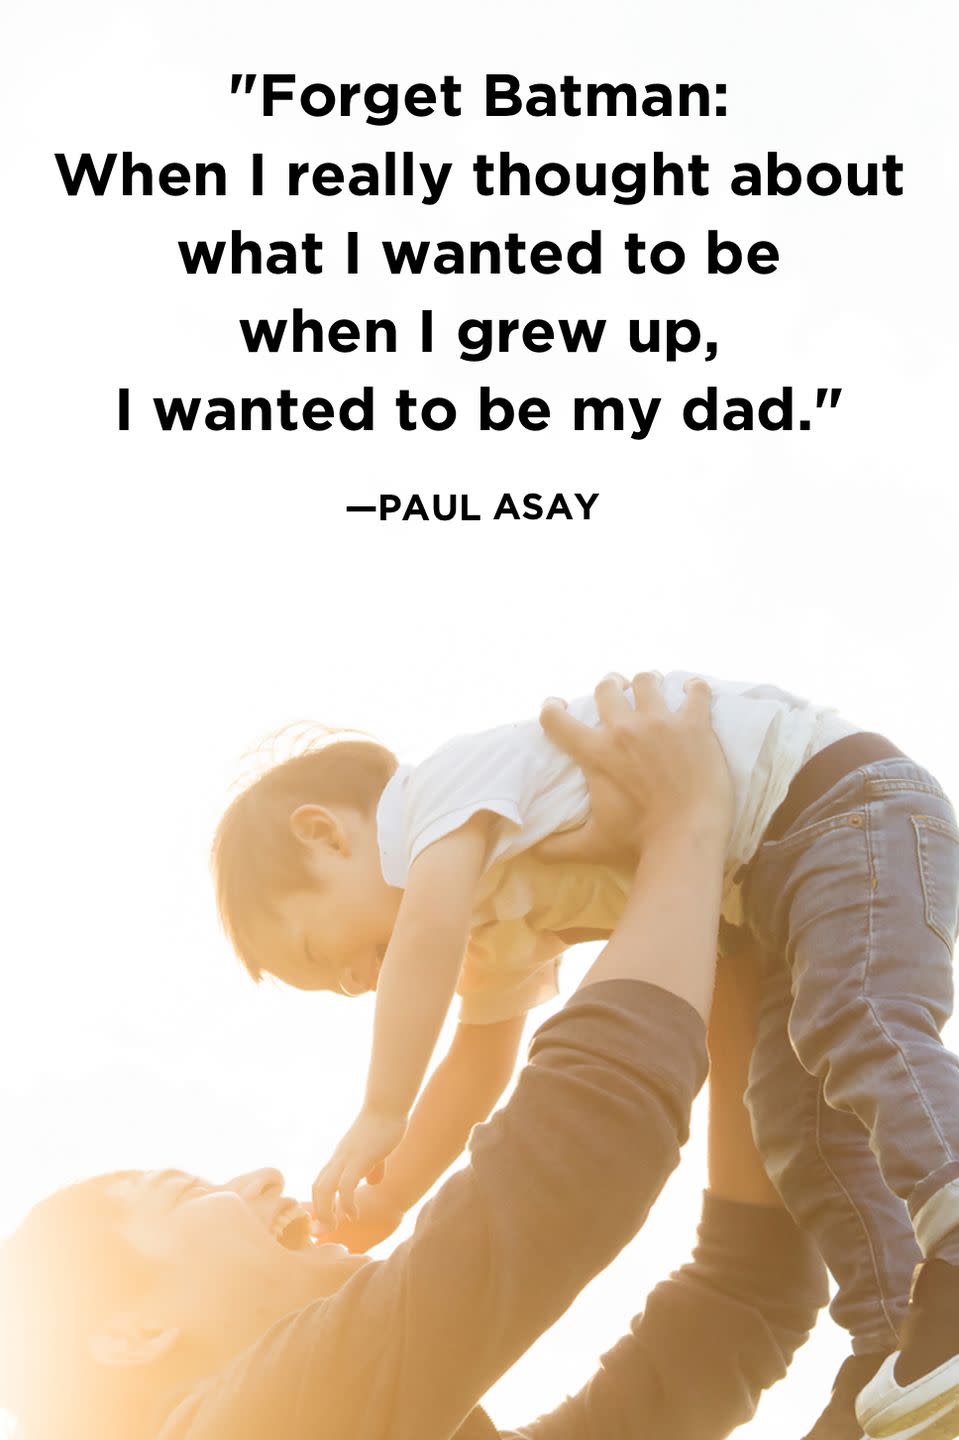 Father-Son Quotes to Make Dad Smile on Father's Day